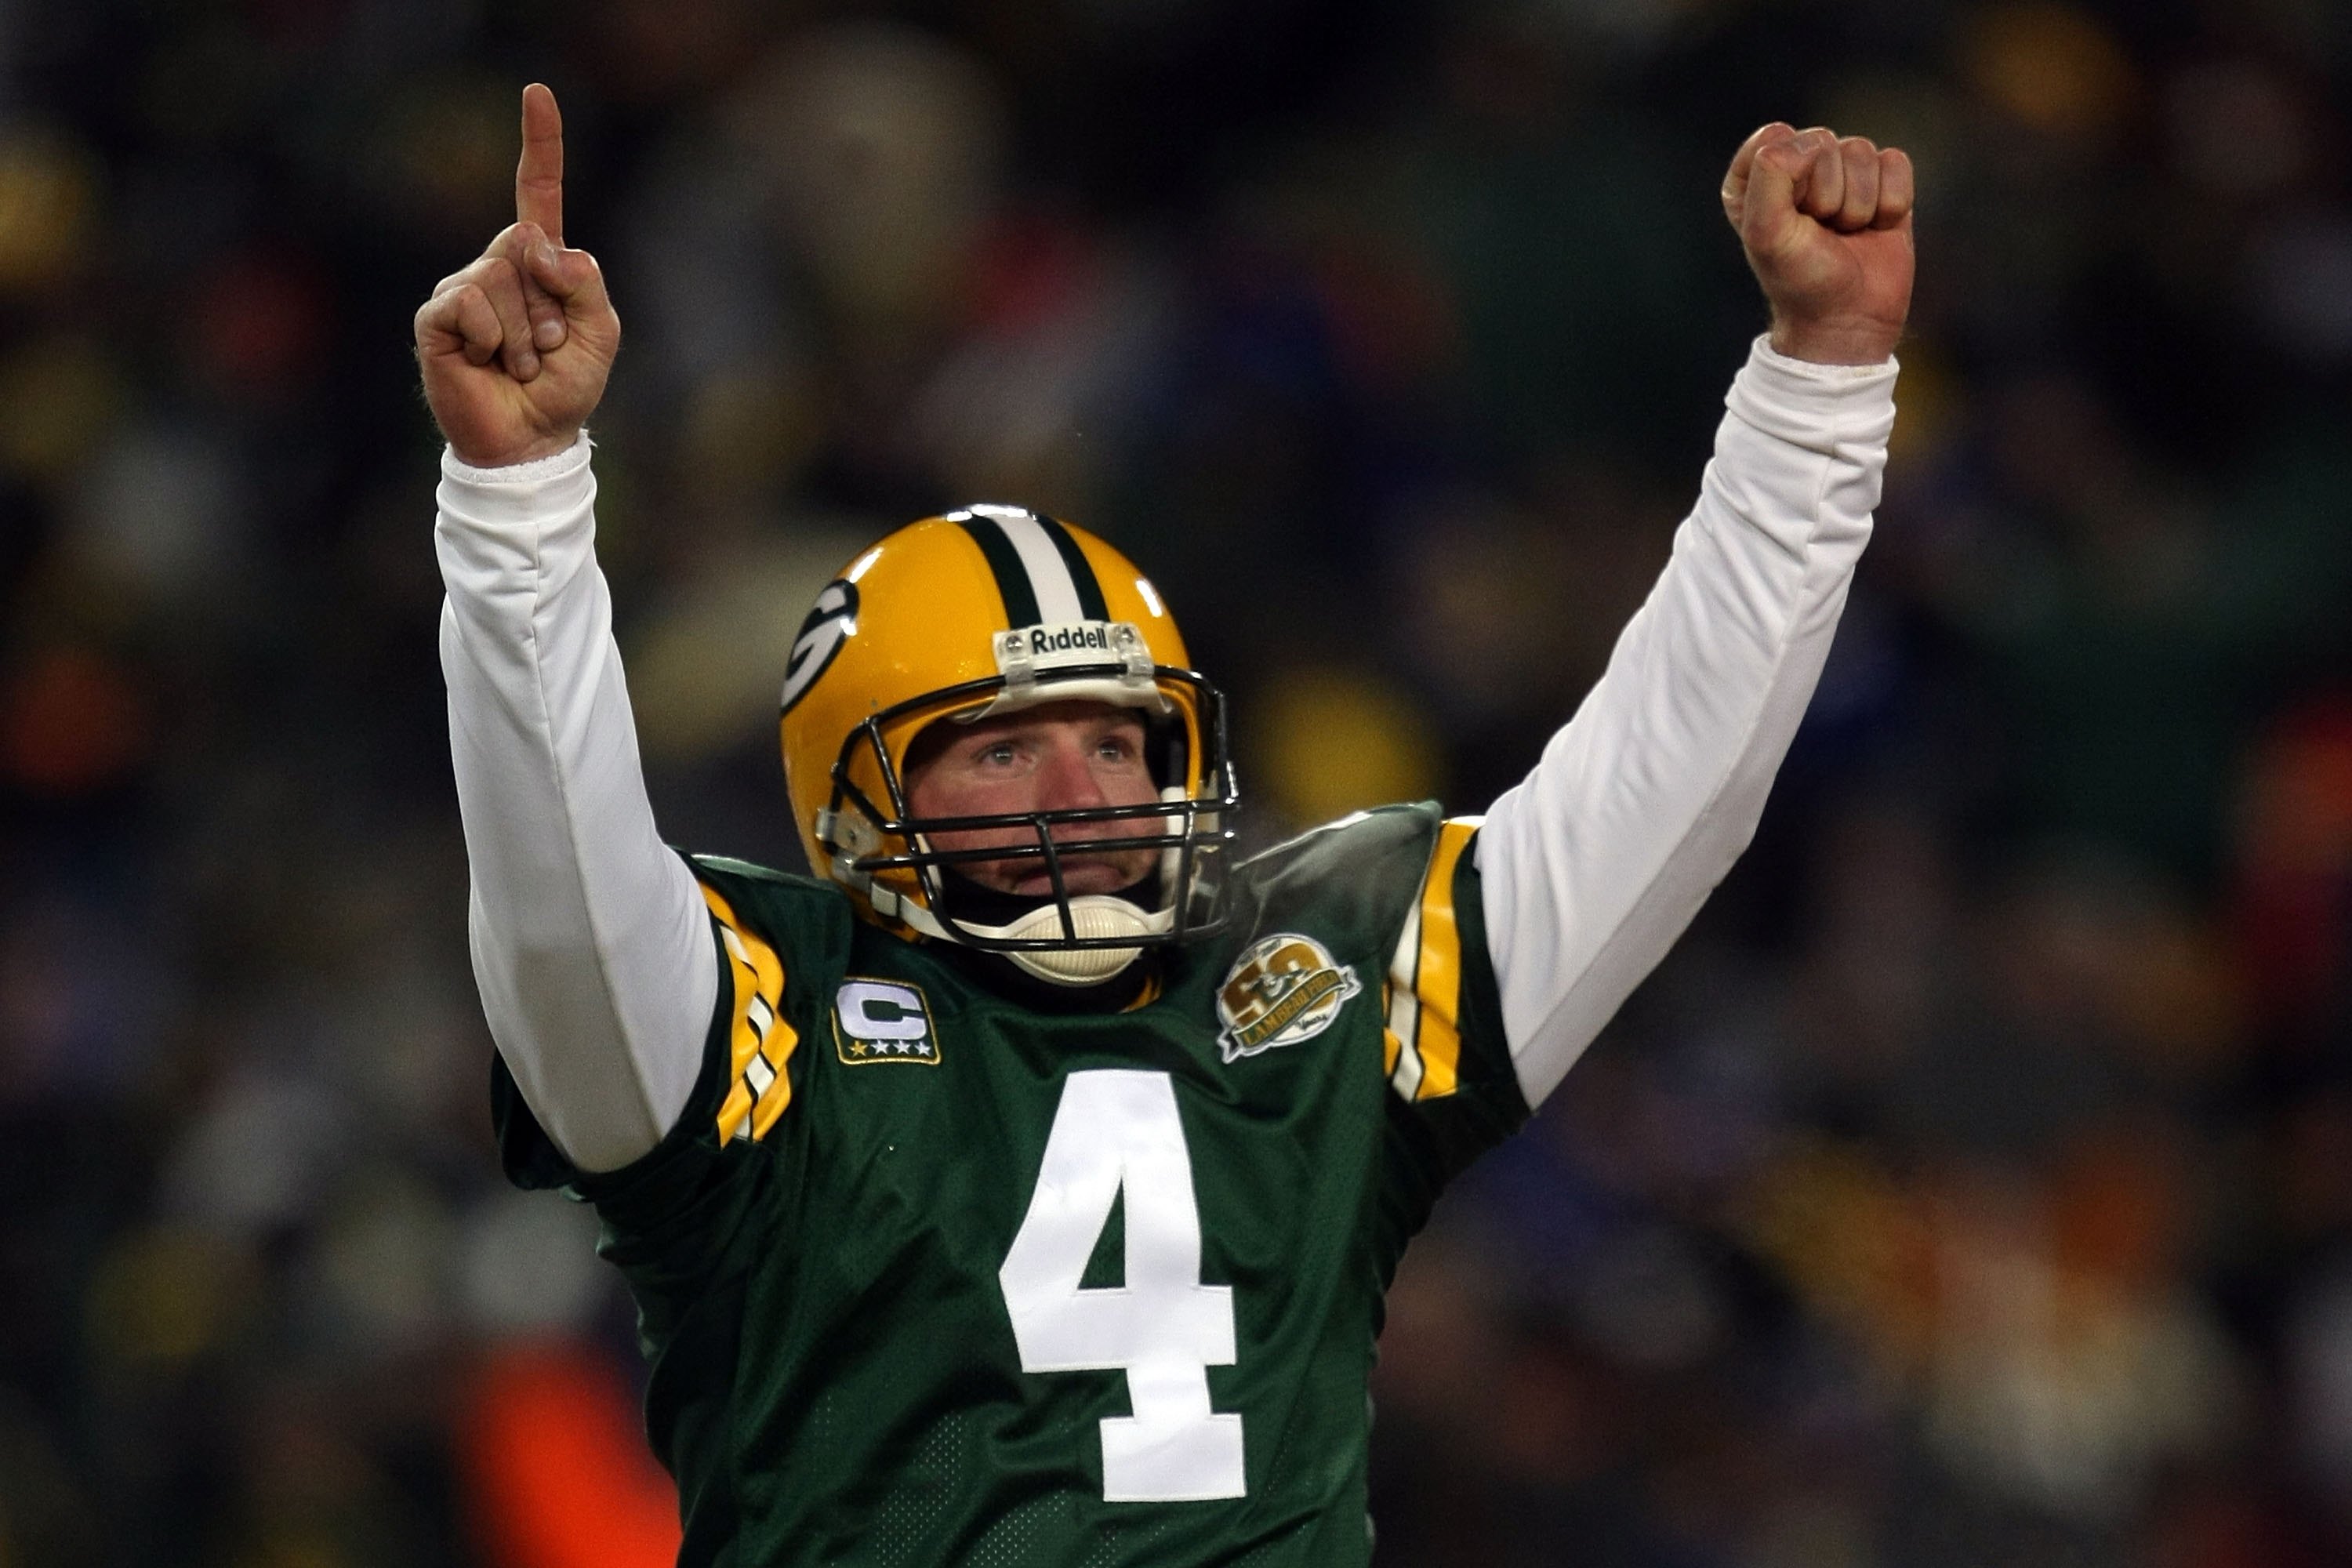 GREEN BAY, WI - JANUARY 20:  Quarterback Brett Favre #4 of the Green Bay Packers reacts after a Packers touchdown during the NFC championship game against the New York Giants on January 20, 2008 at Lambeau Field in Green Bay, Wisconsin. The Giants defeate